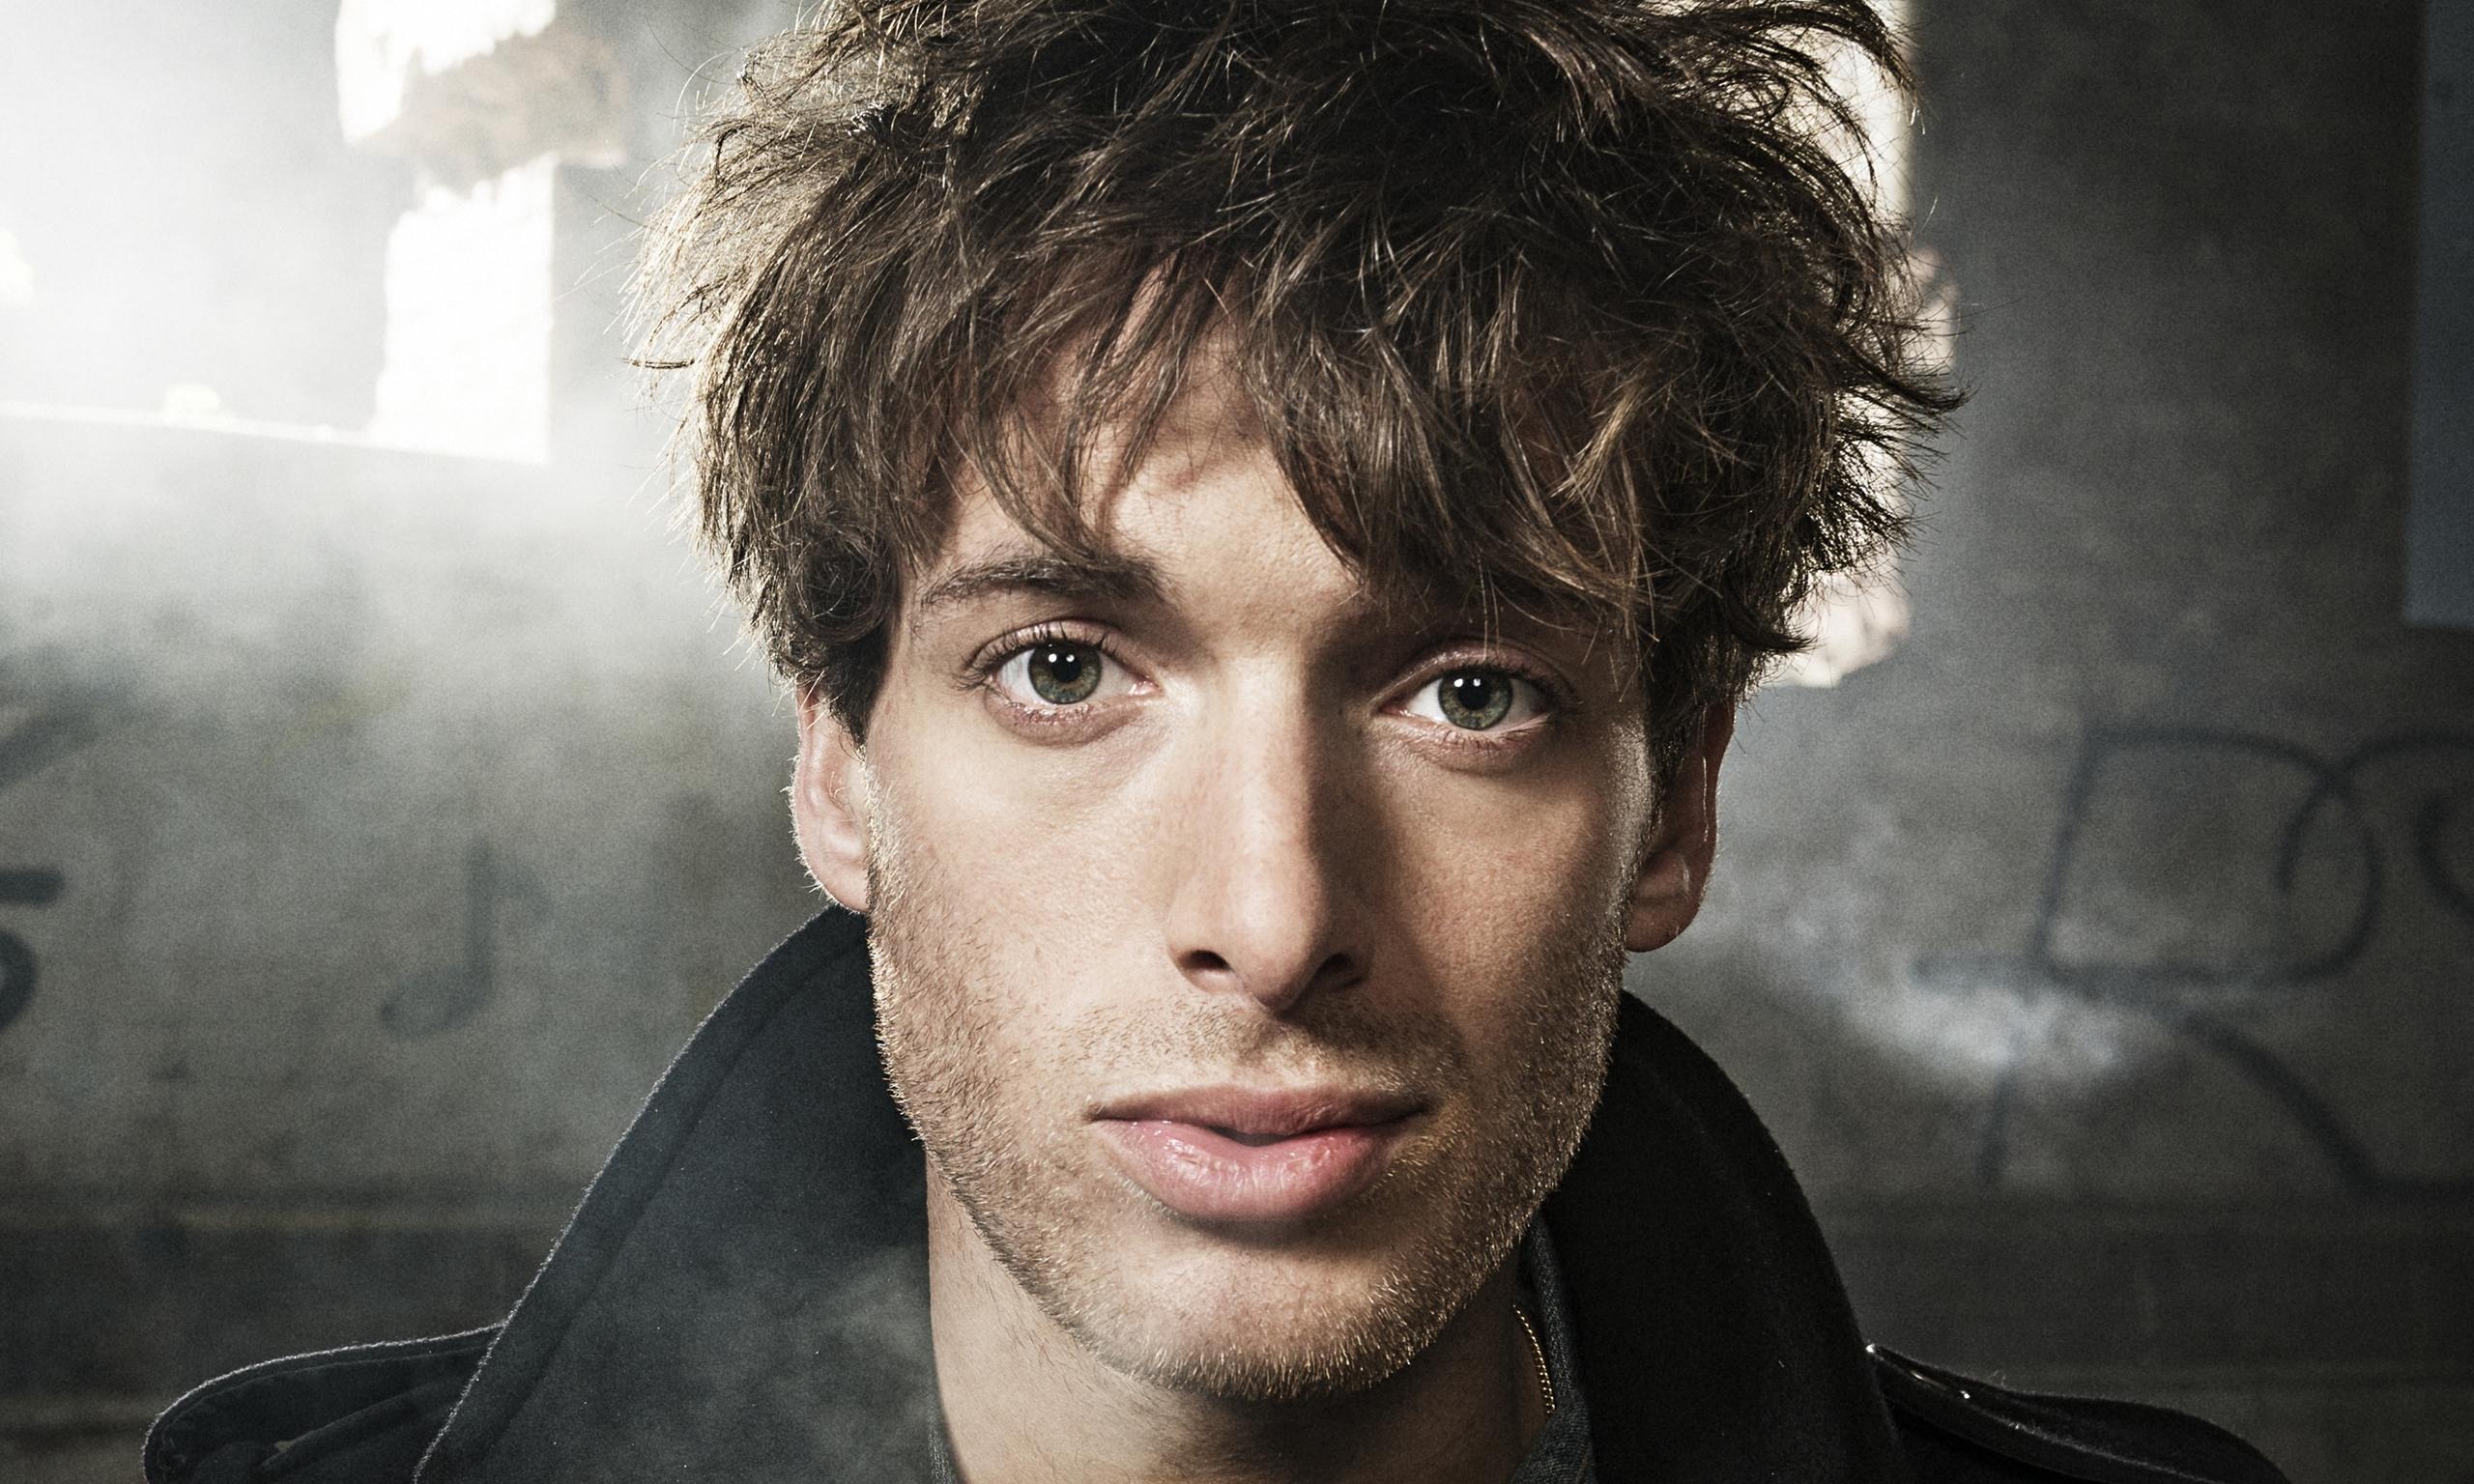 Paolo Nutini wallpapers, Music, HQ Paolo Nutini pictures | 4K Wallpapers 2019 2560x1540